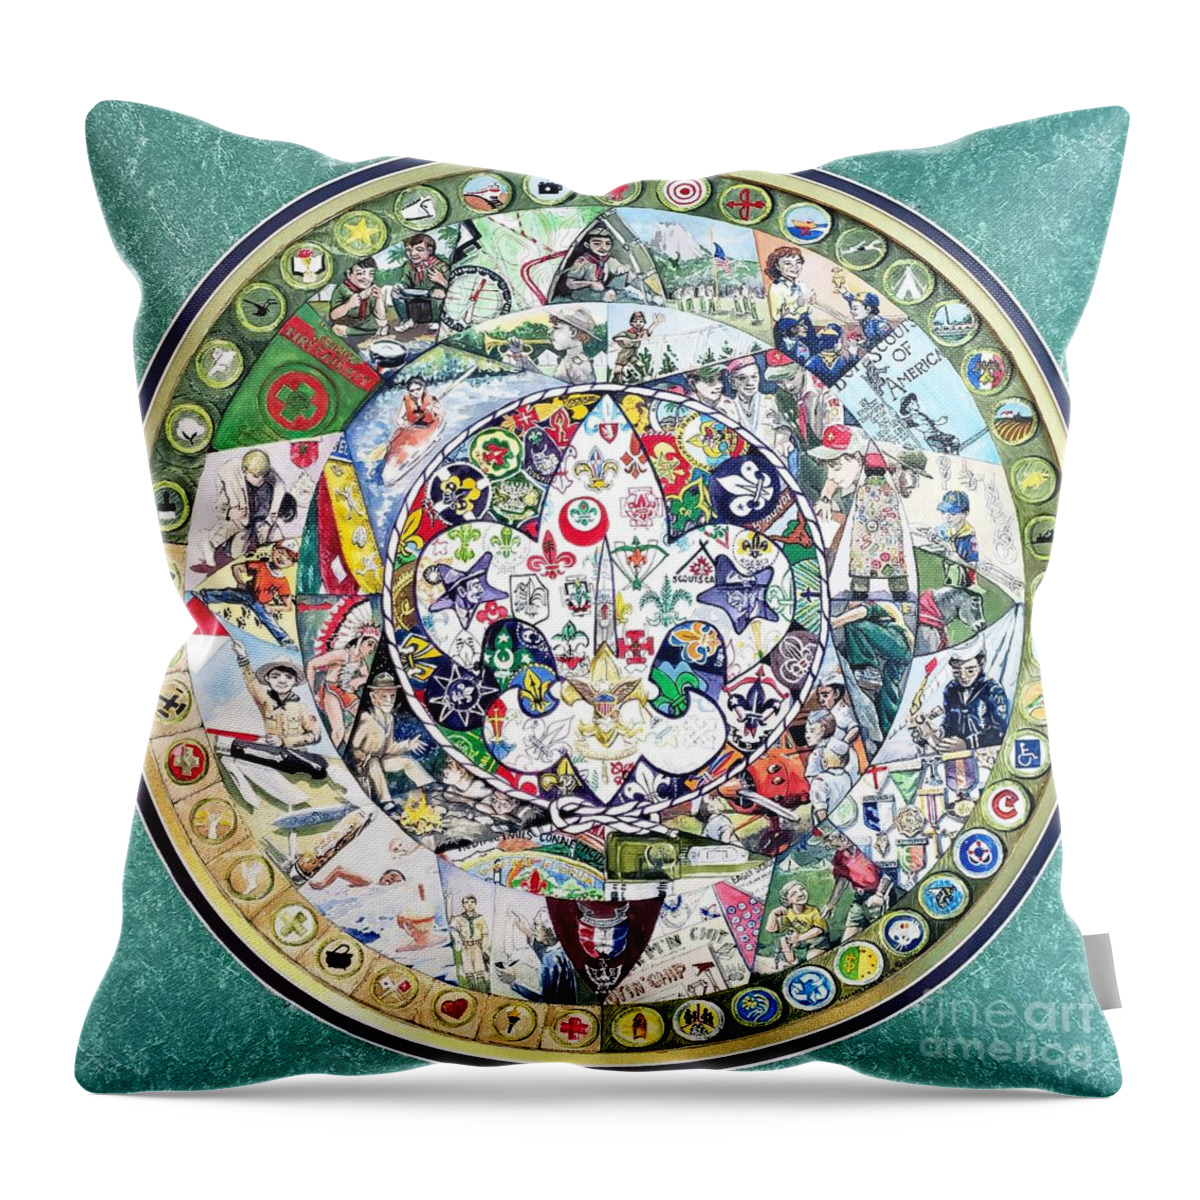 Bsa Throw Pillow featuring the painting Be Prepared by Merana Cadorette